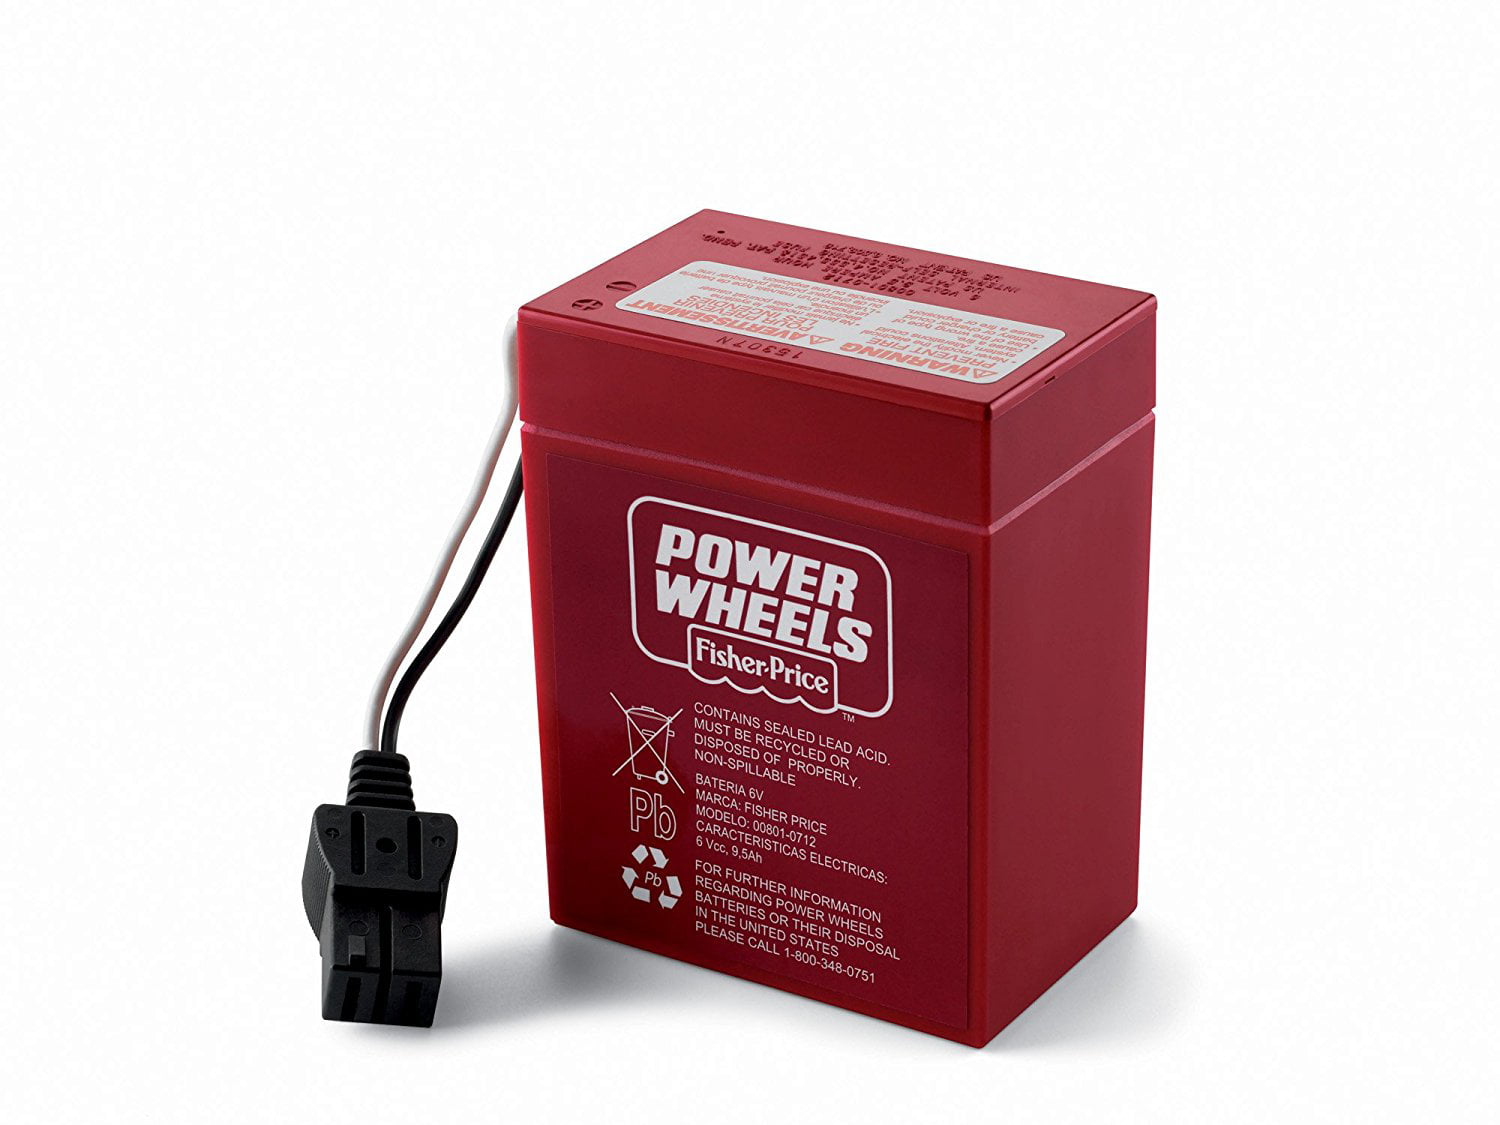 # 117 BRAND NEW 12 Volt Power Wheels Charger for 00801-1661 Battery Fisher Price 